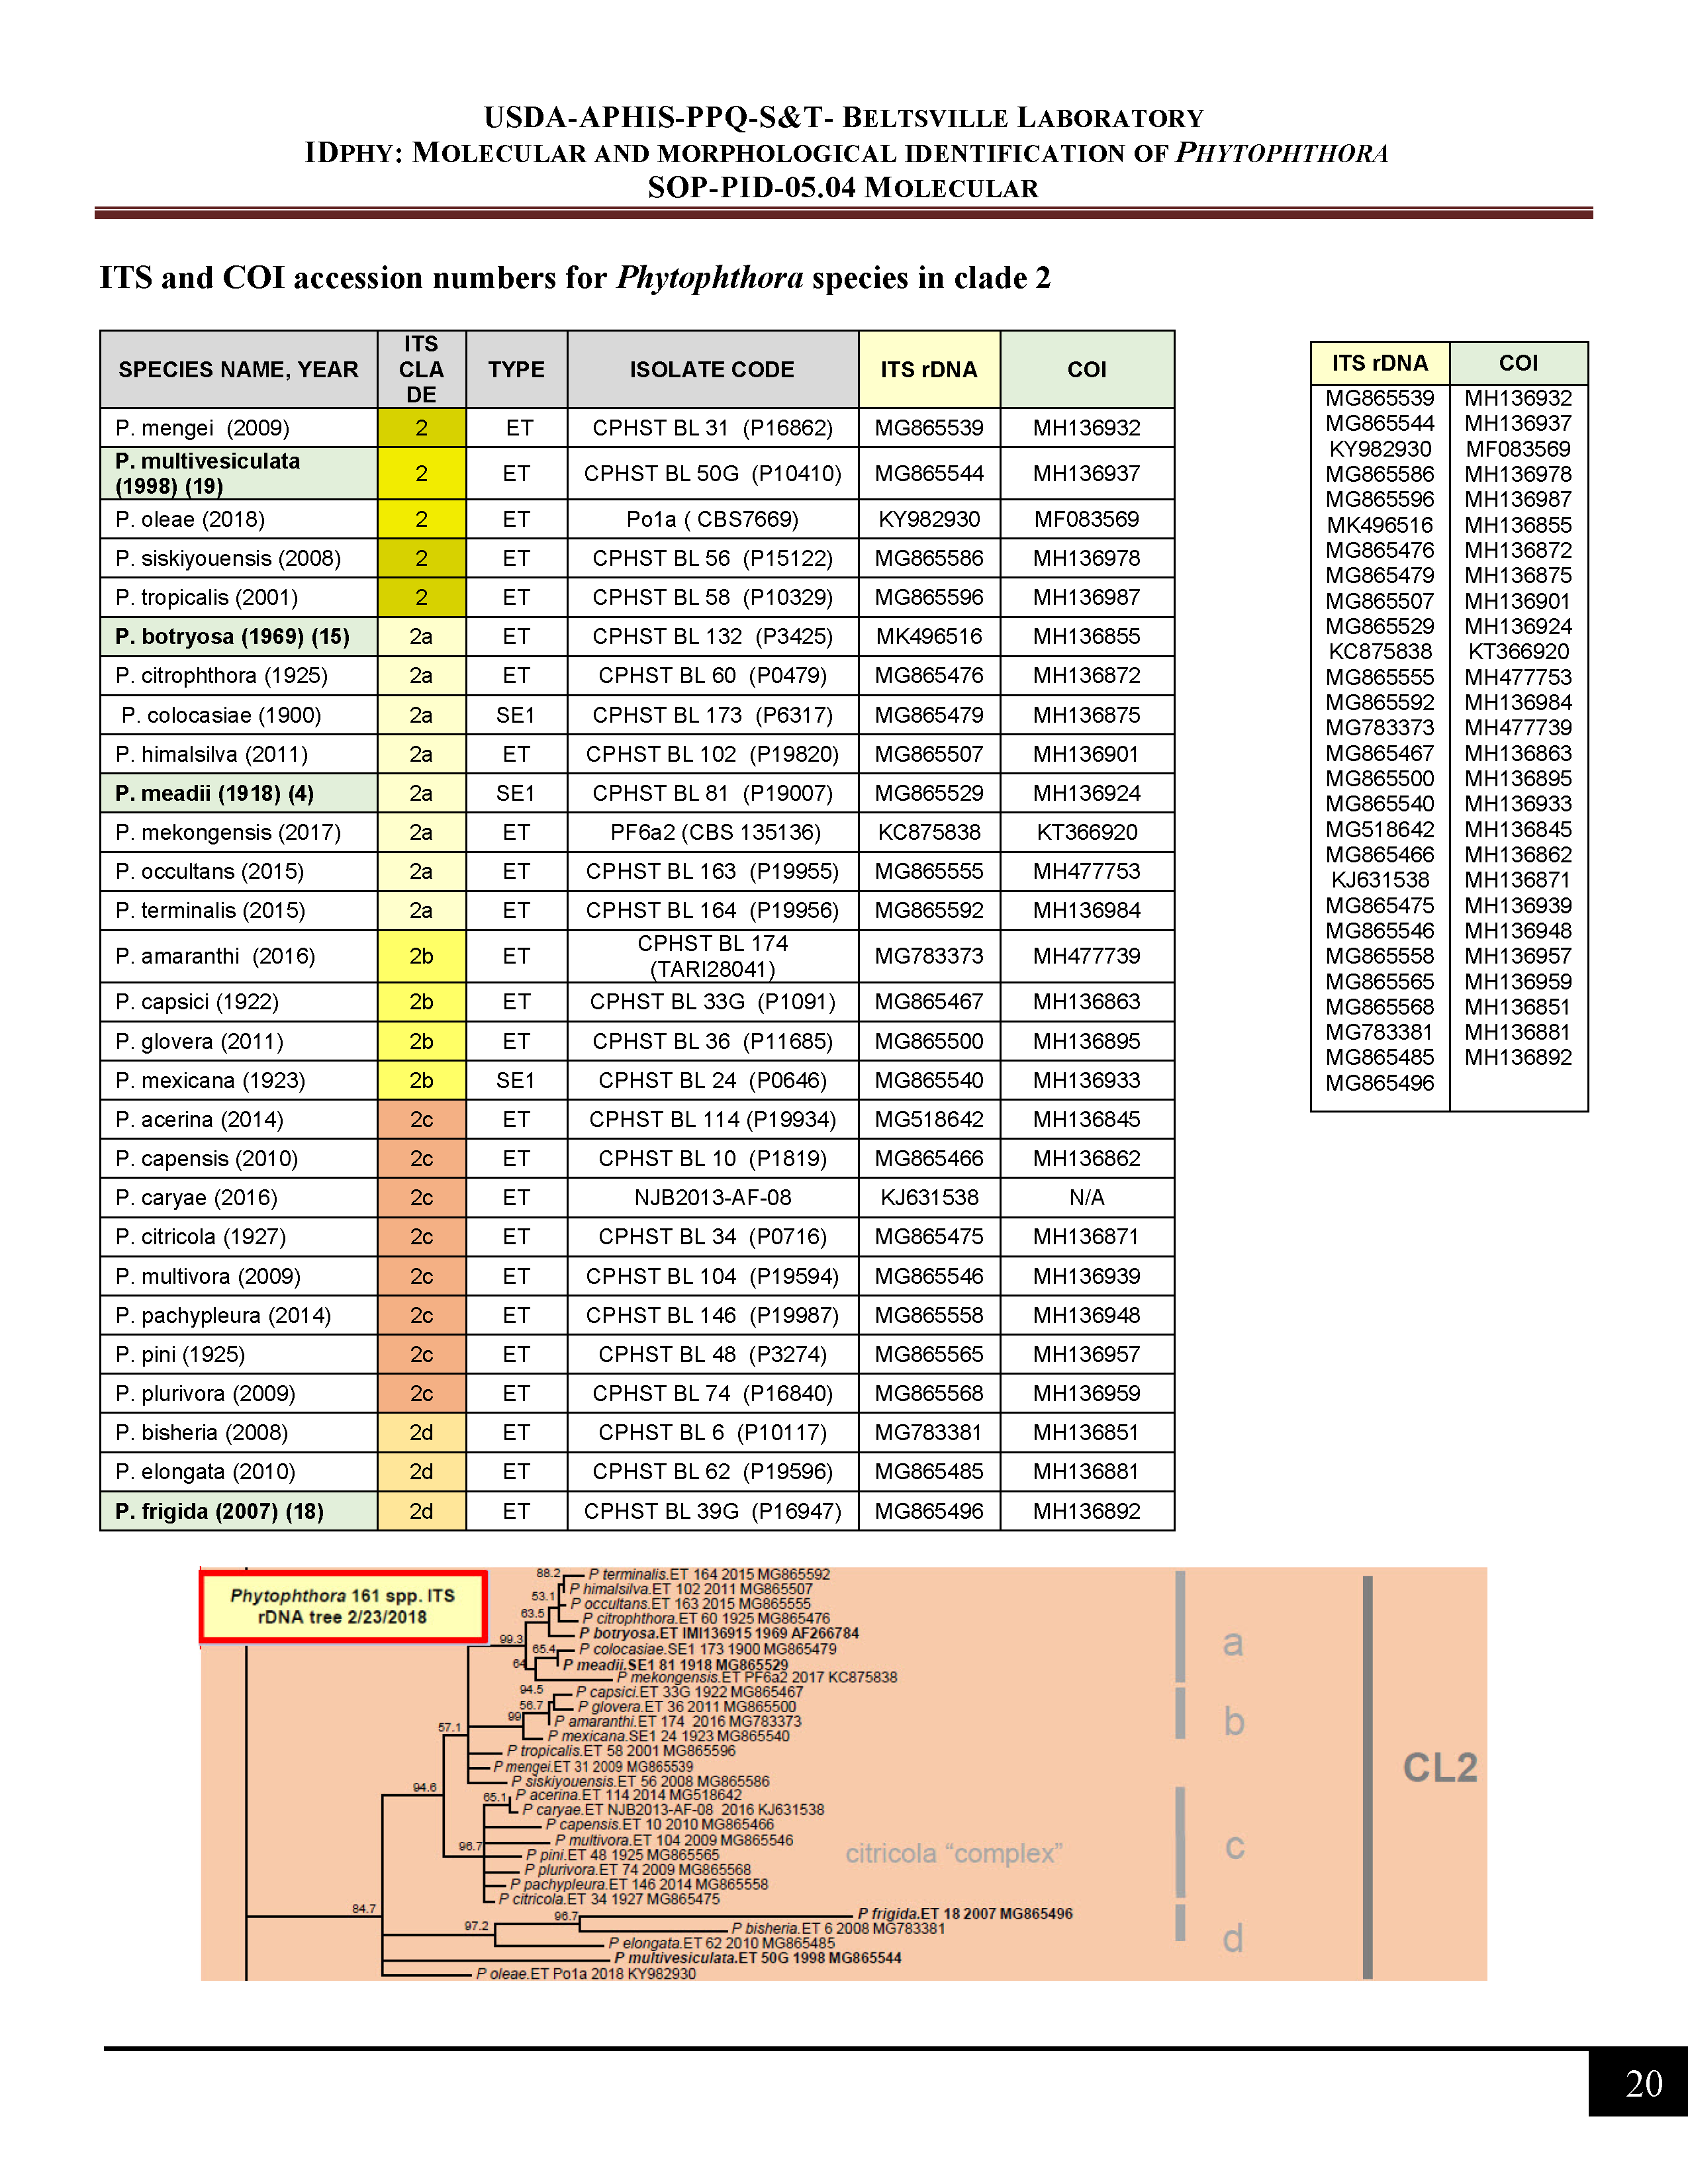 ITS and COI accession numbers for <em>Phytophthora</em> species in clade 1